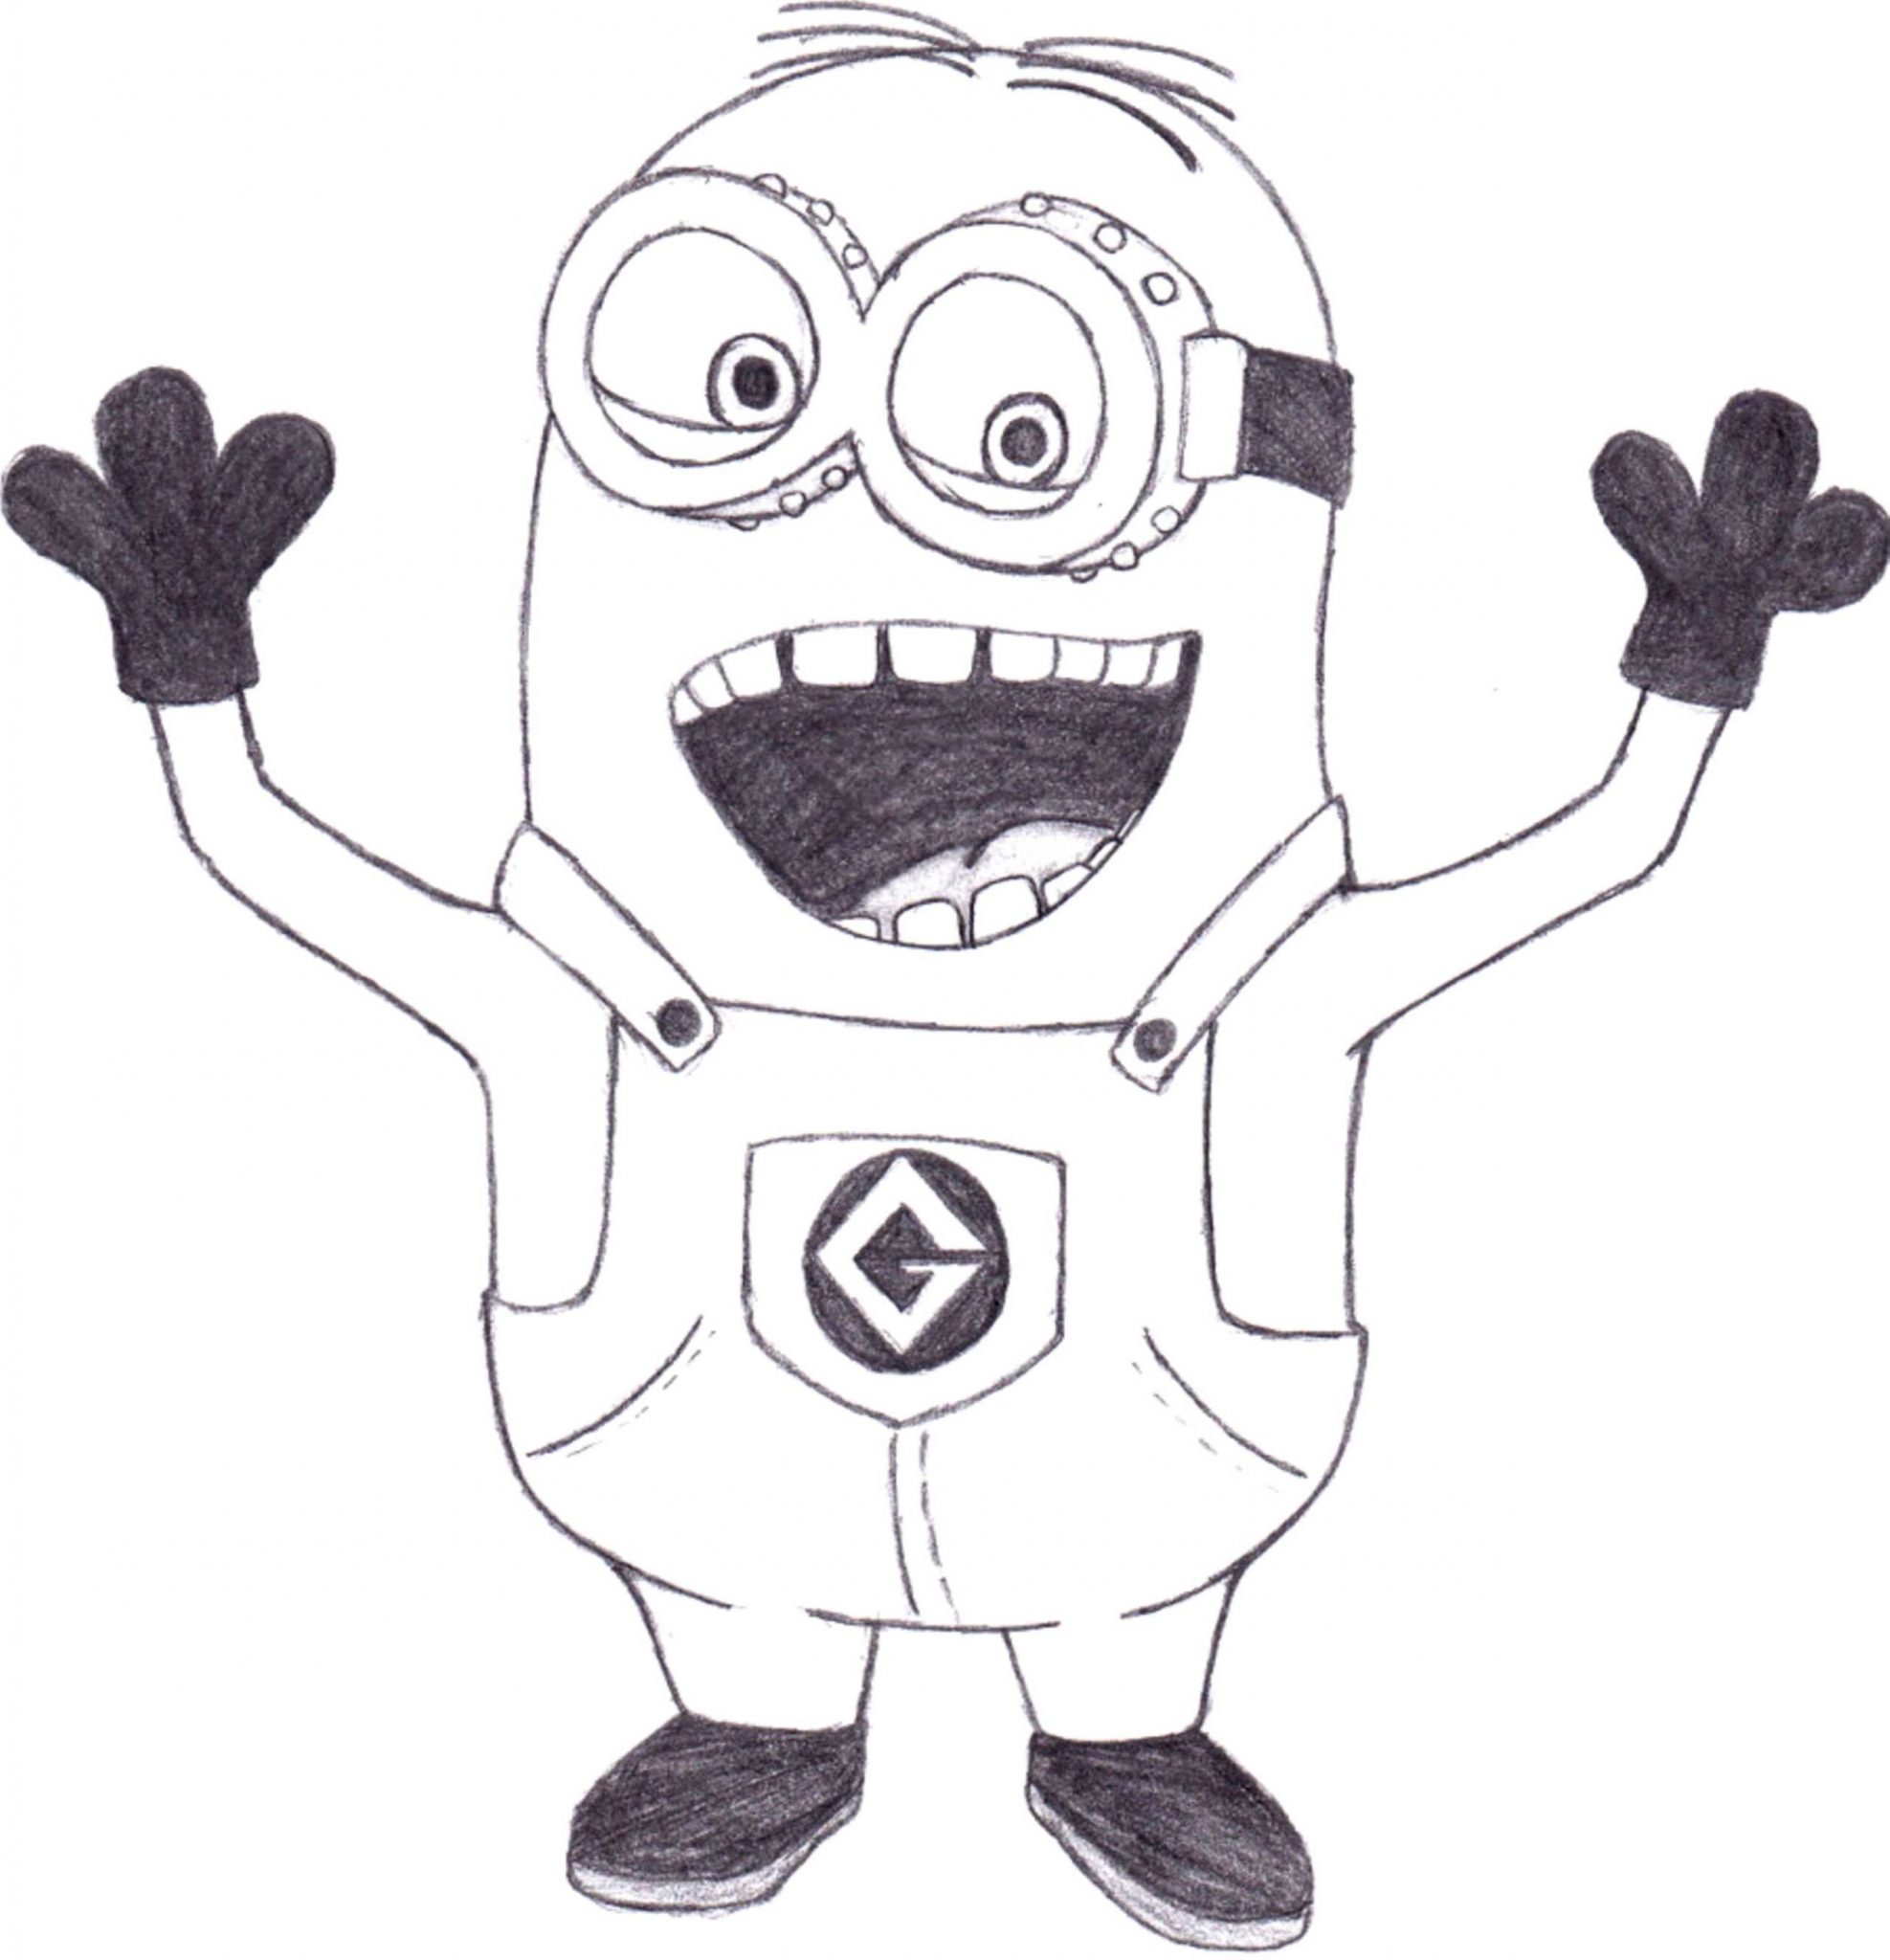 Print & Download - Minion Coloring Pages for Kids to Have ...